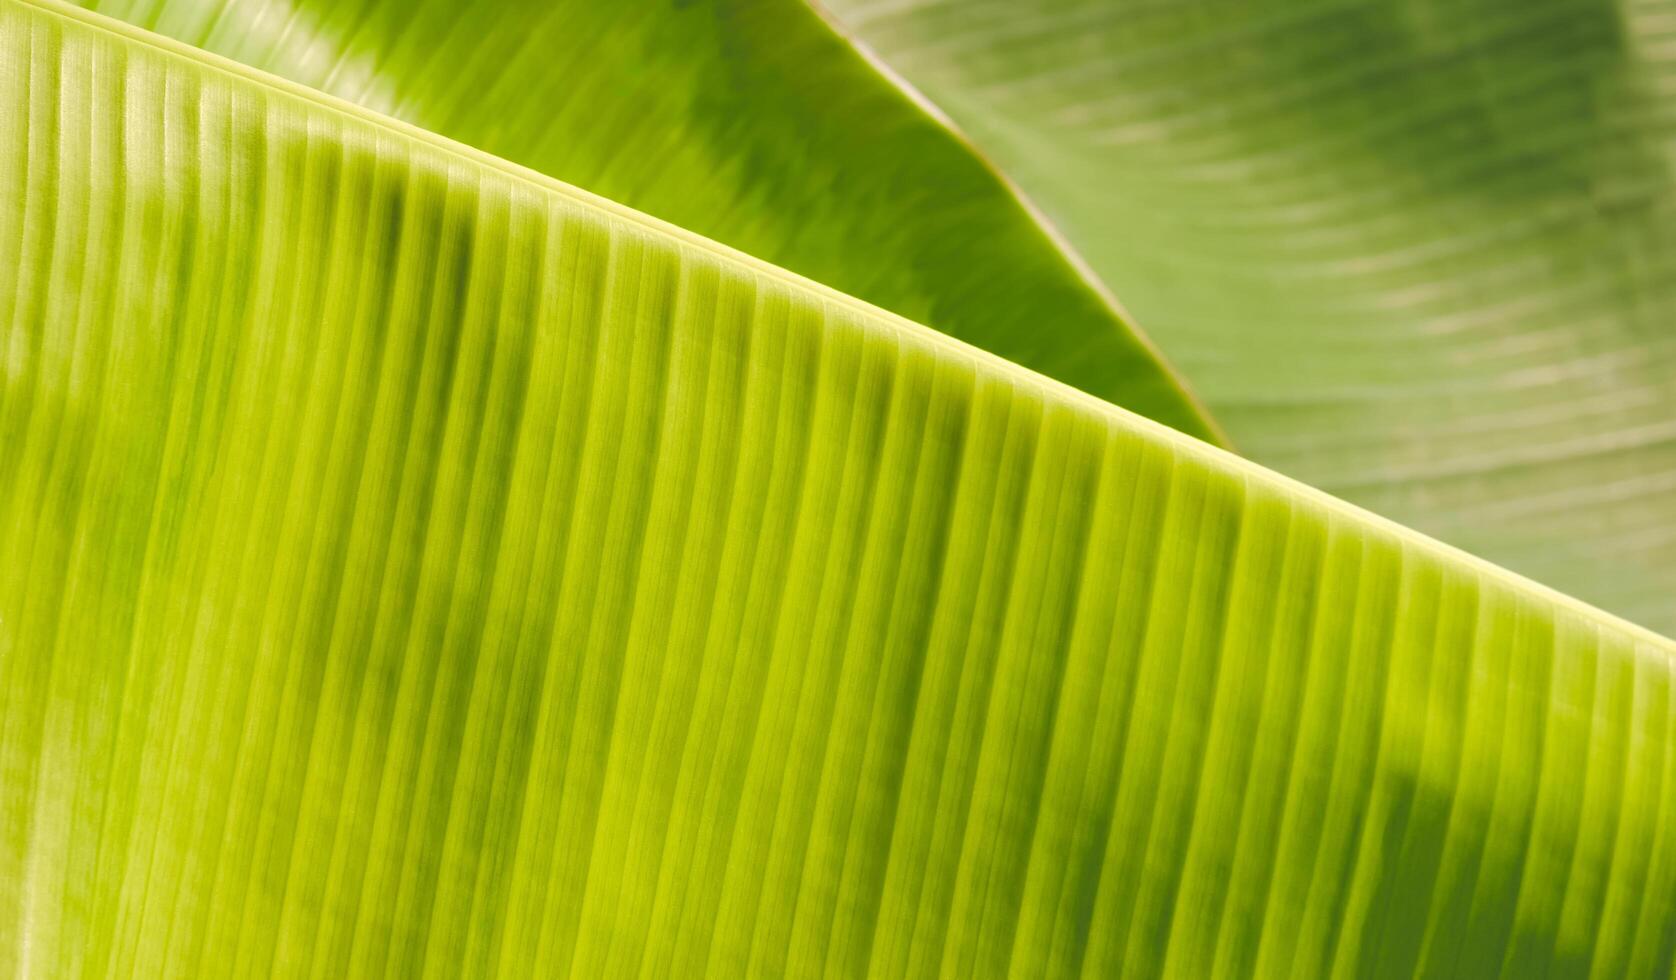 Background and texture of green Banana Leaves with sunlight on surface, natural Foliage Background concept photo